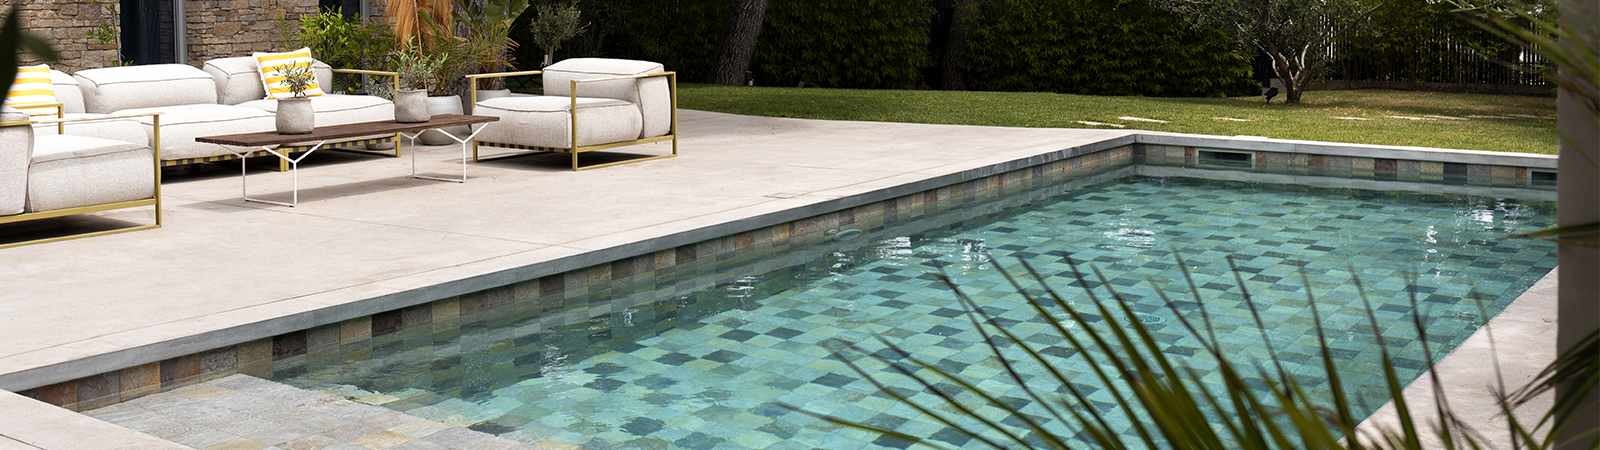 Energy efficient pools by Kripsol®